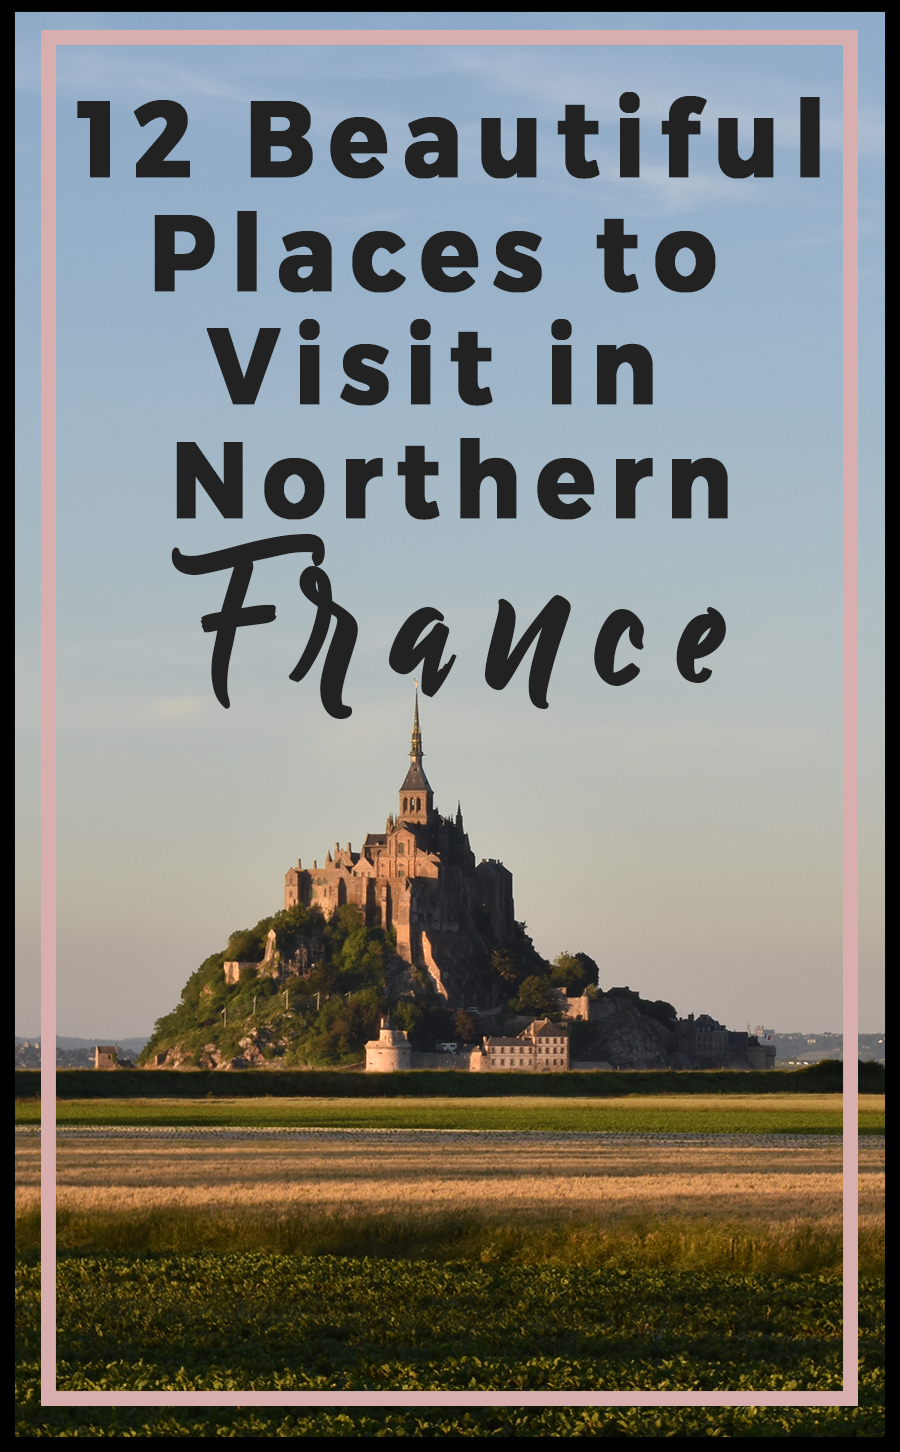 12 Beautiful Places to Visit in Northern France